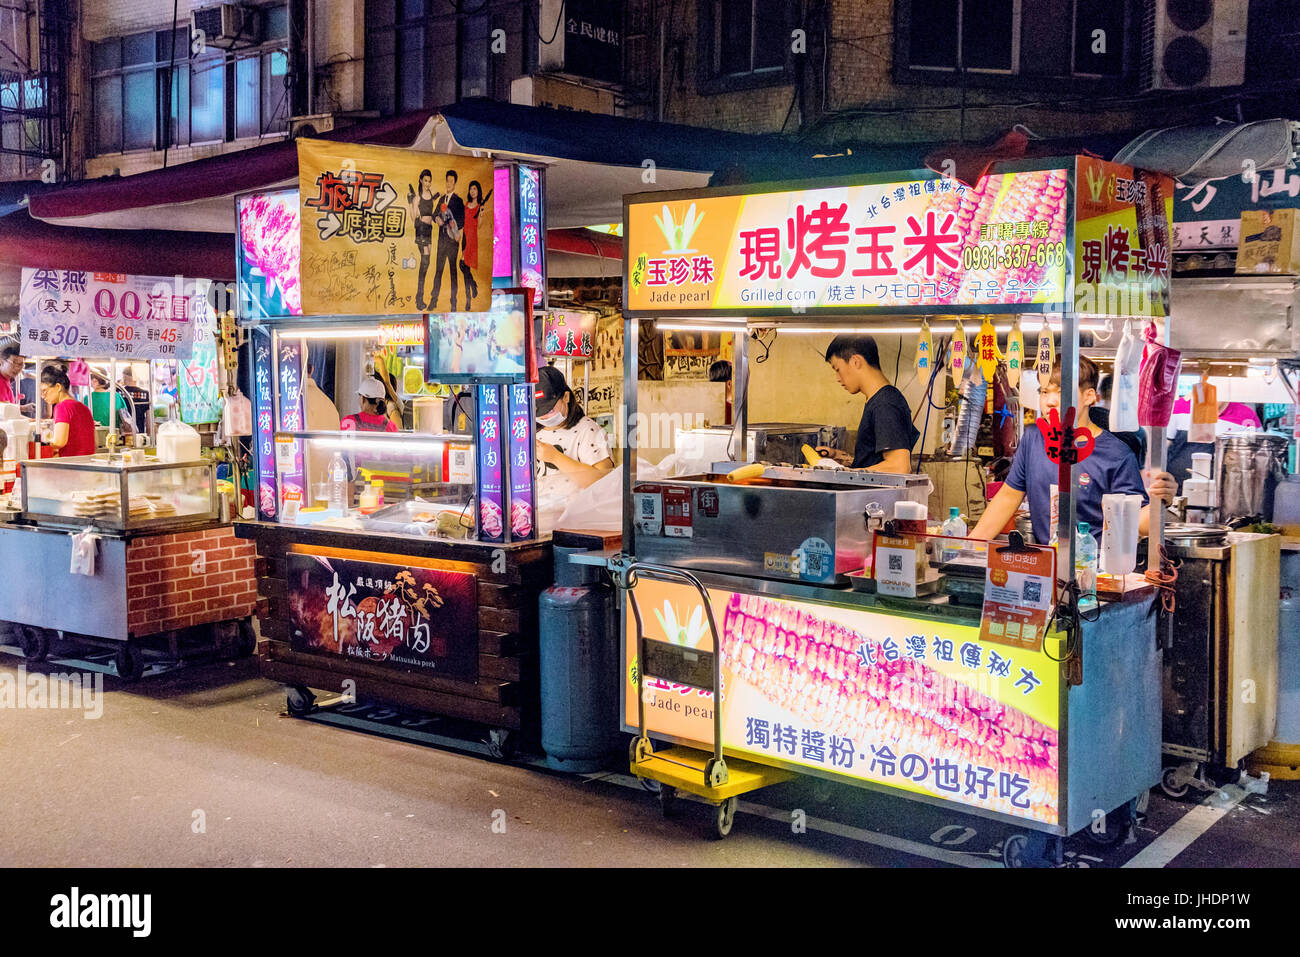 TAIPEI, TAIWAN - JUNE 19: These are food stalls in Raohe street night market stalls like these are very common in Taiwanese night markets on June 19,  Stock Photo